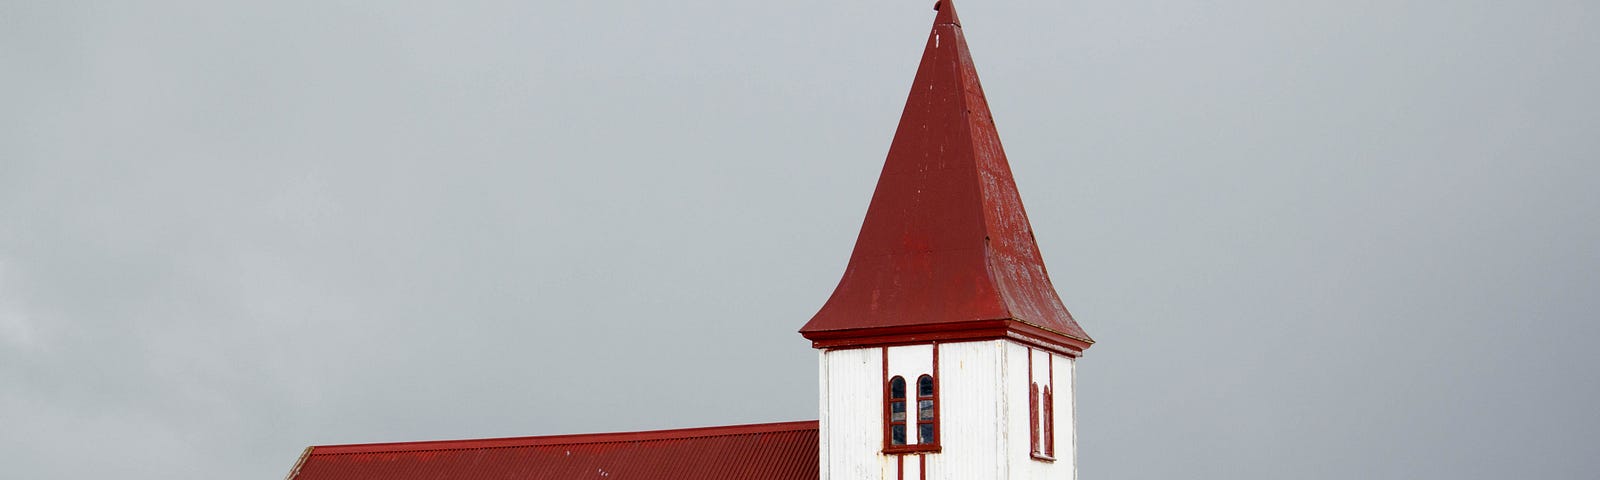 Church building with red roof.